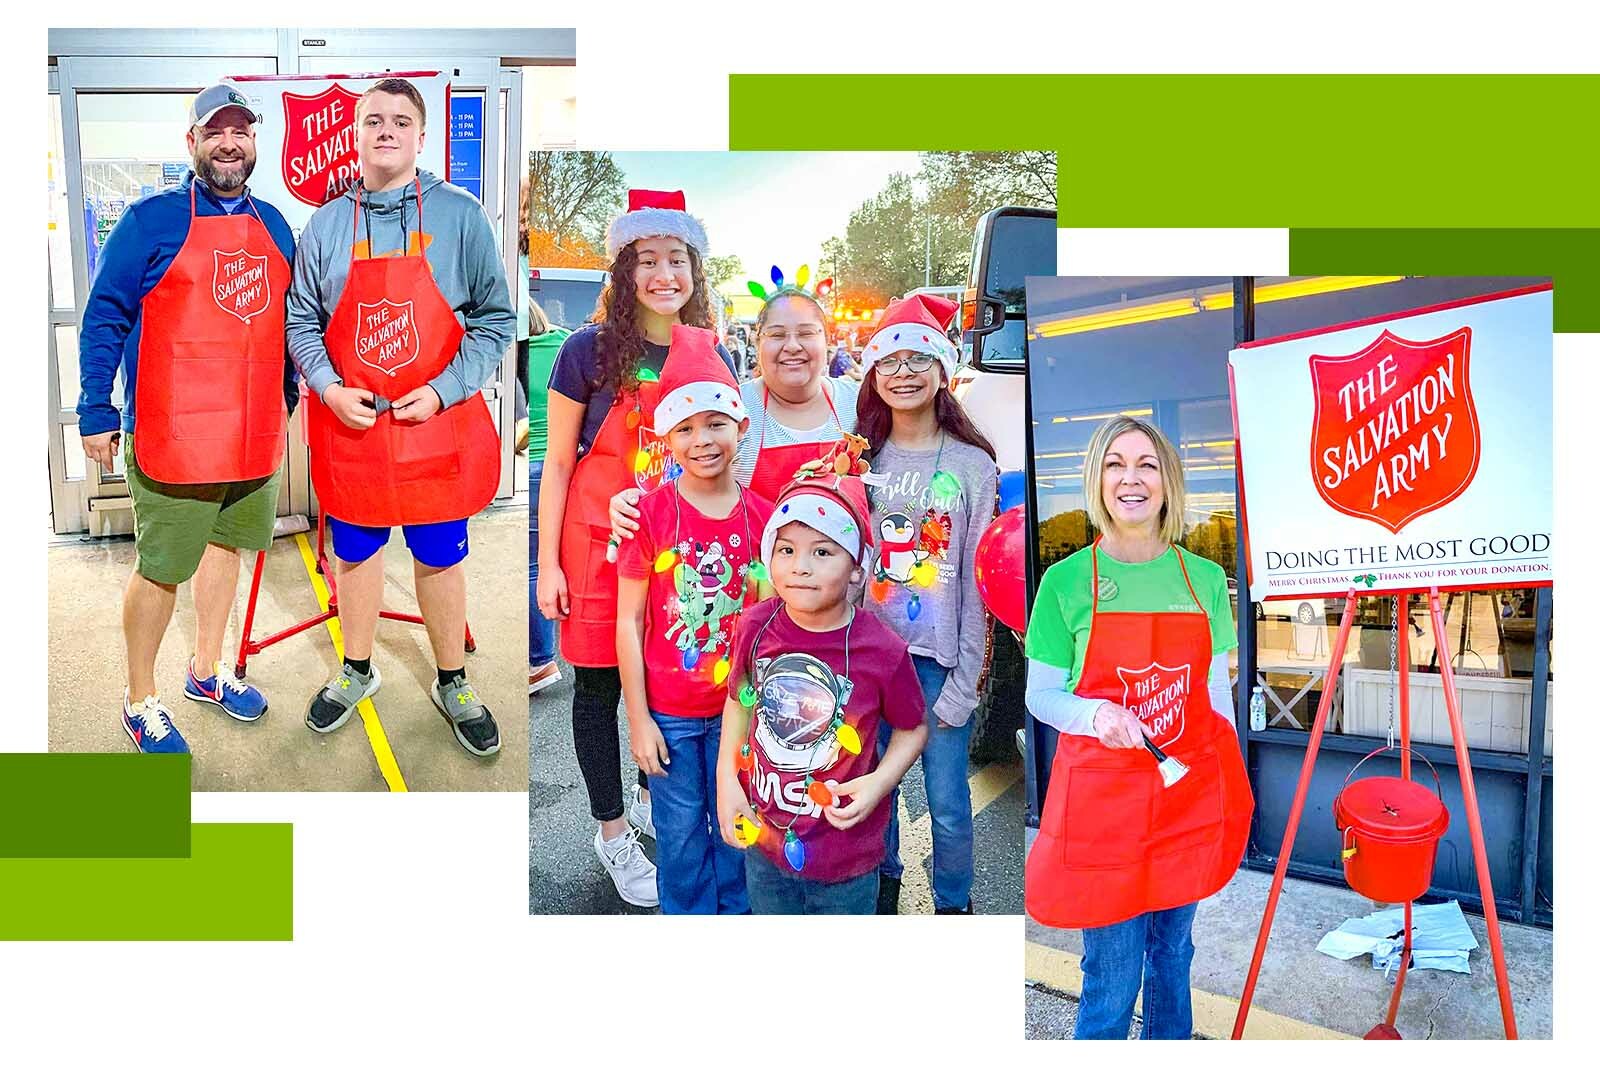 Associates and family at Salvation army events